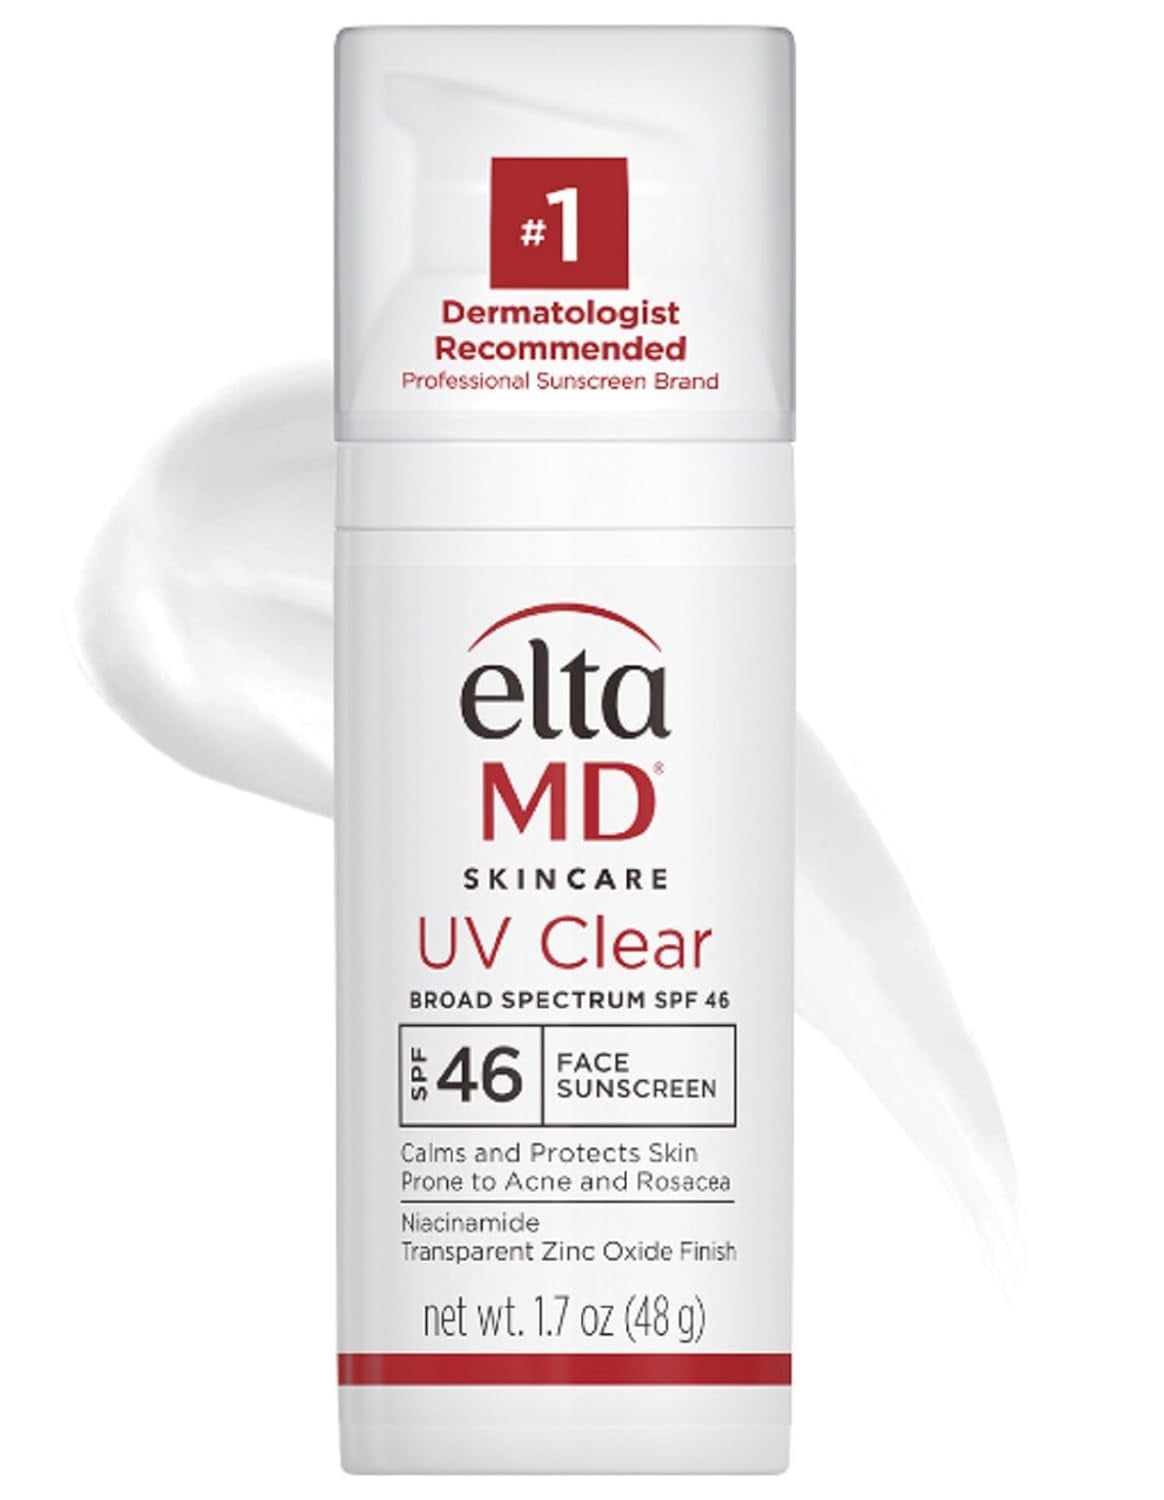 <p><a href="https://www.amazon.com/EltaMD-Acne-Prone-Mineral-Based-Dermatologist-Recommended/dp/B002MSN3QQ">BUY NOW</a></p><p>$43</p><p><a href="https://www.amazon.com/EltaMD-Acne-Prone-Mineral-Based-Dermatologist-Recommended/dp/B002MSN3QQ" class="ga-track"><strong>EltaMD UV Clear Face Sunscreen</strong></a> ($43) </p><p>Consider this your gentle yet urgent reminder to apply facial sunscreen daily to keep your skin healthy and prevent damage. This one from EltaMD makes it easy because it's silky-smooth, lightweight, moisturizing, and doesn't have a strong sunscreen smell. It's a hit among beauty editors, celebrities, and beauty aficionados alike.</p>